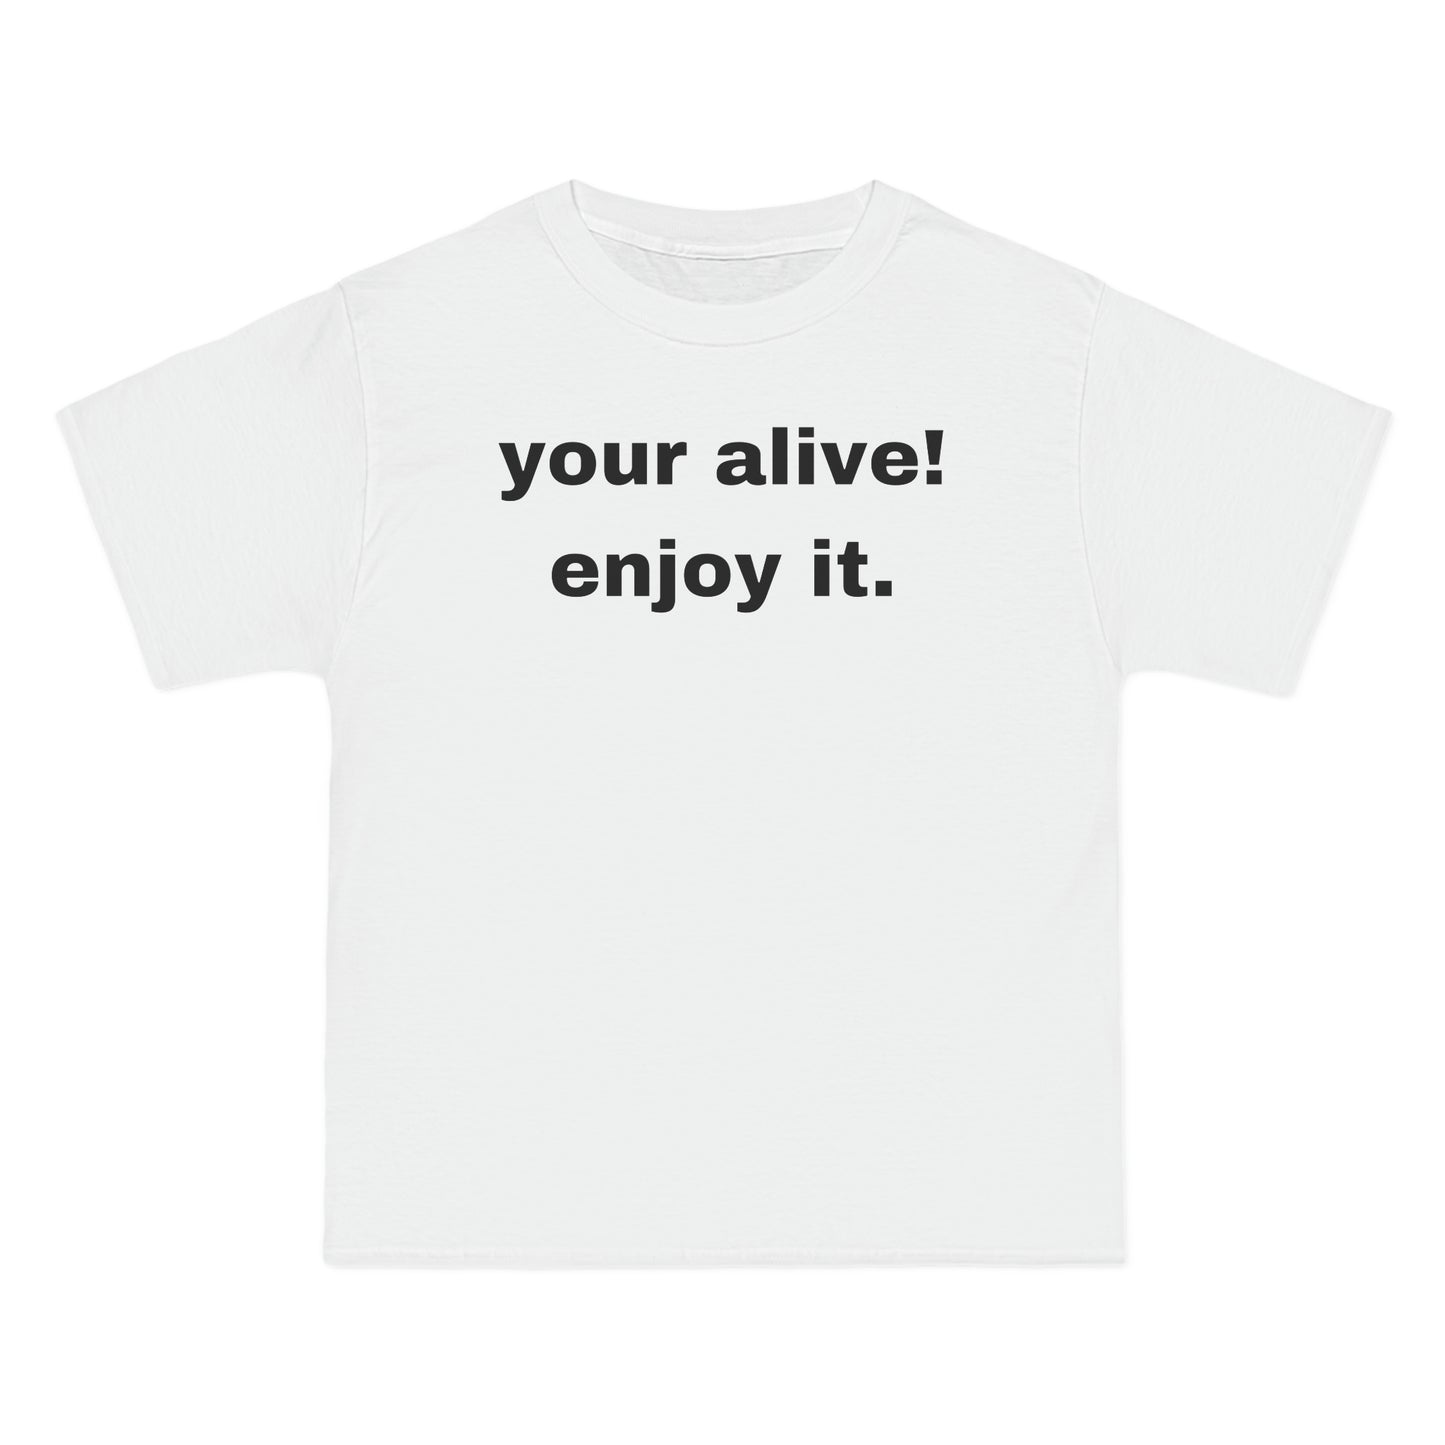 your alive! Tee